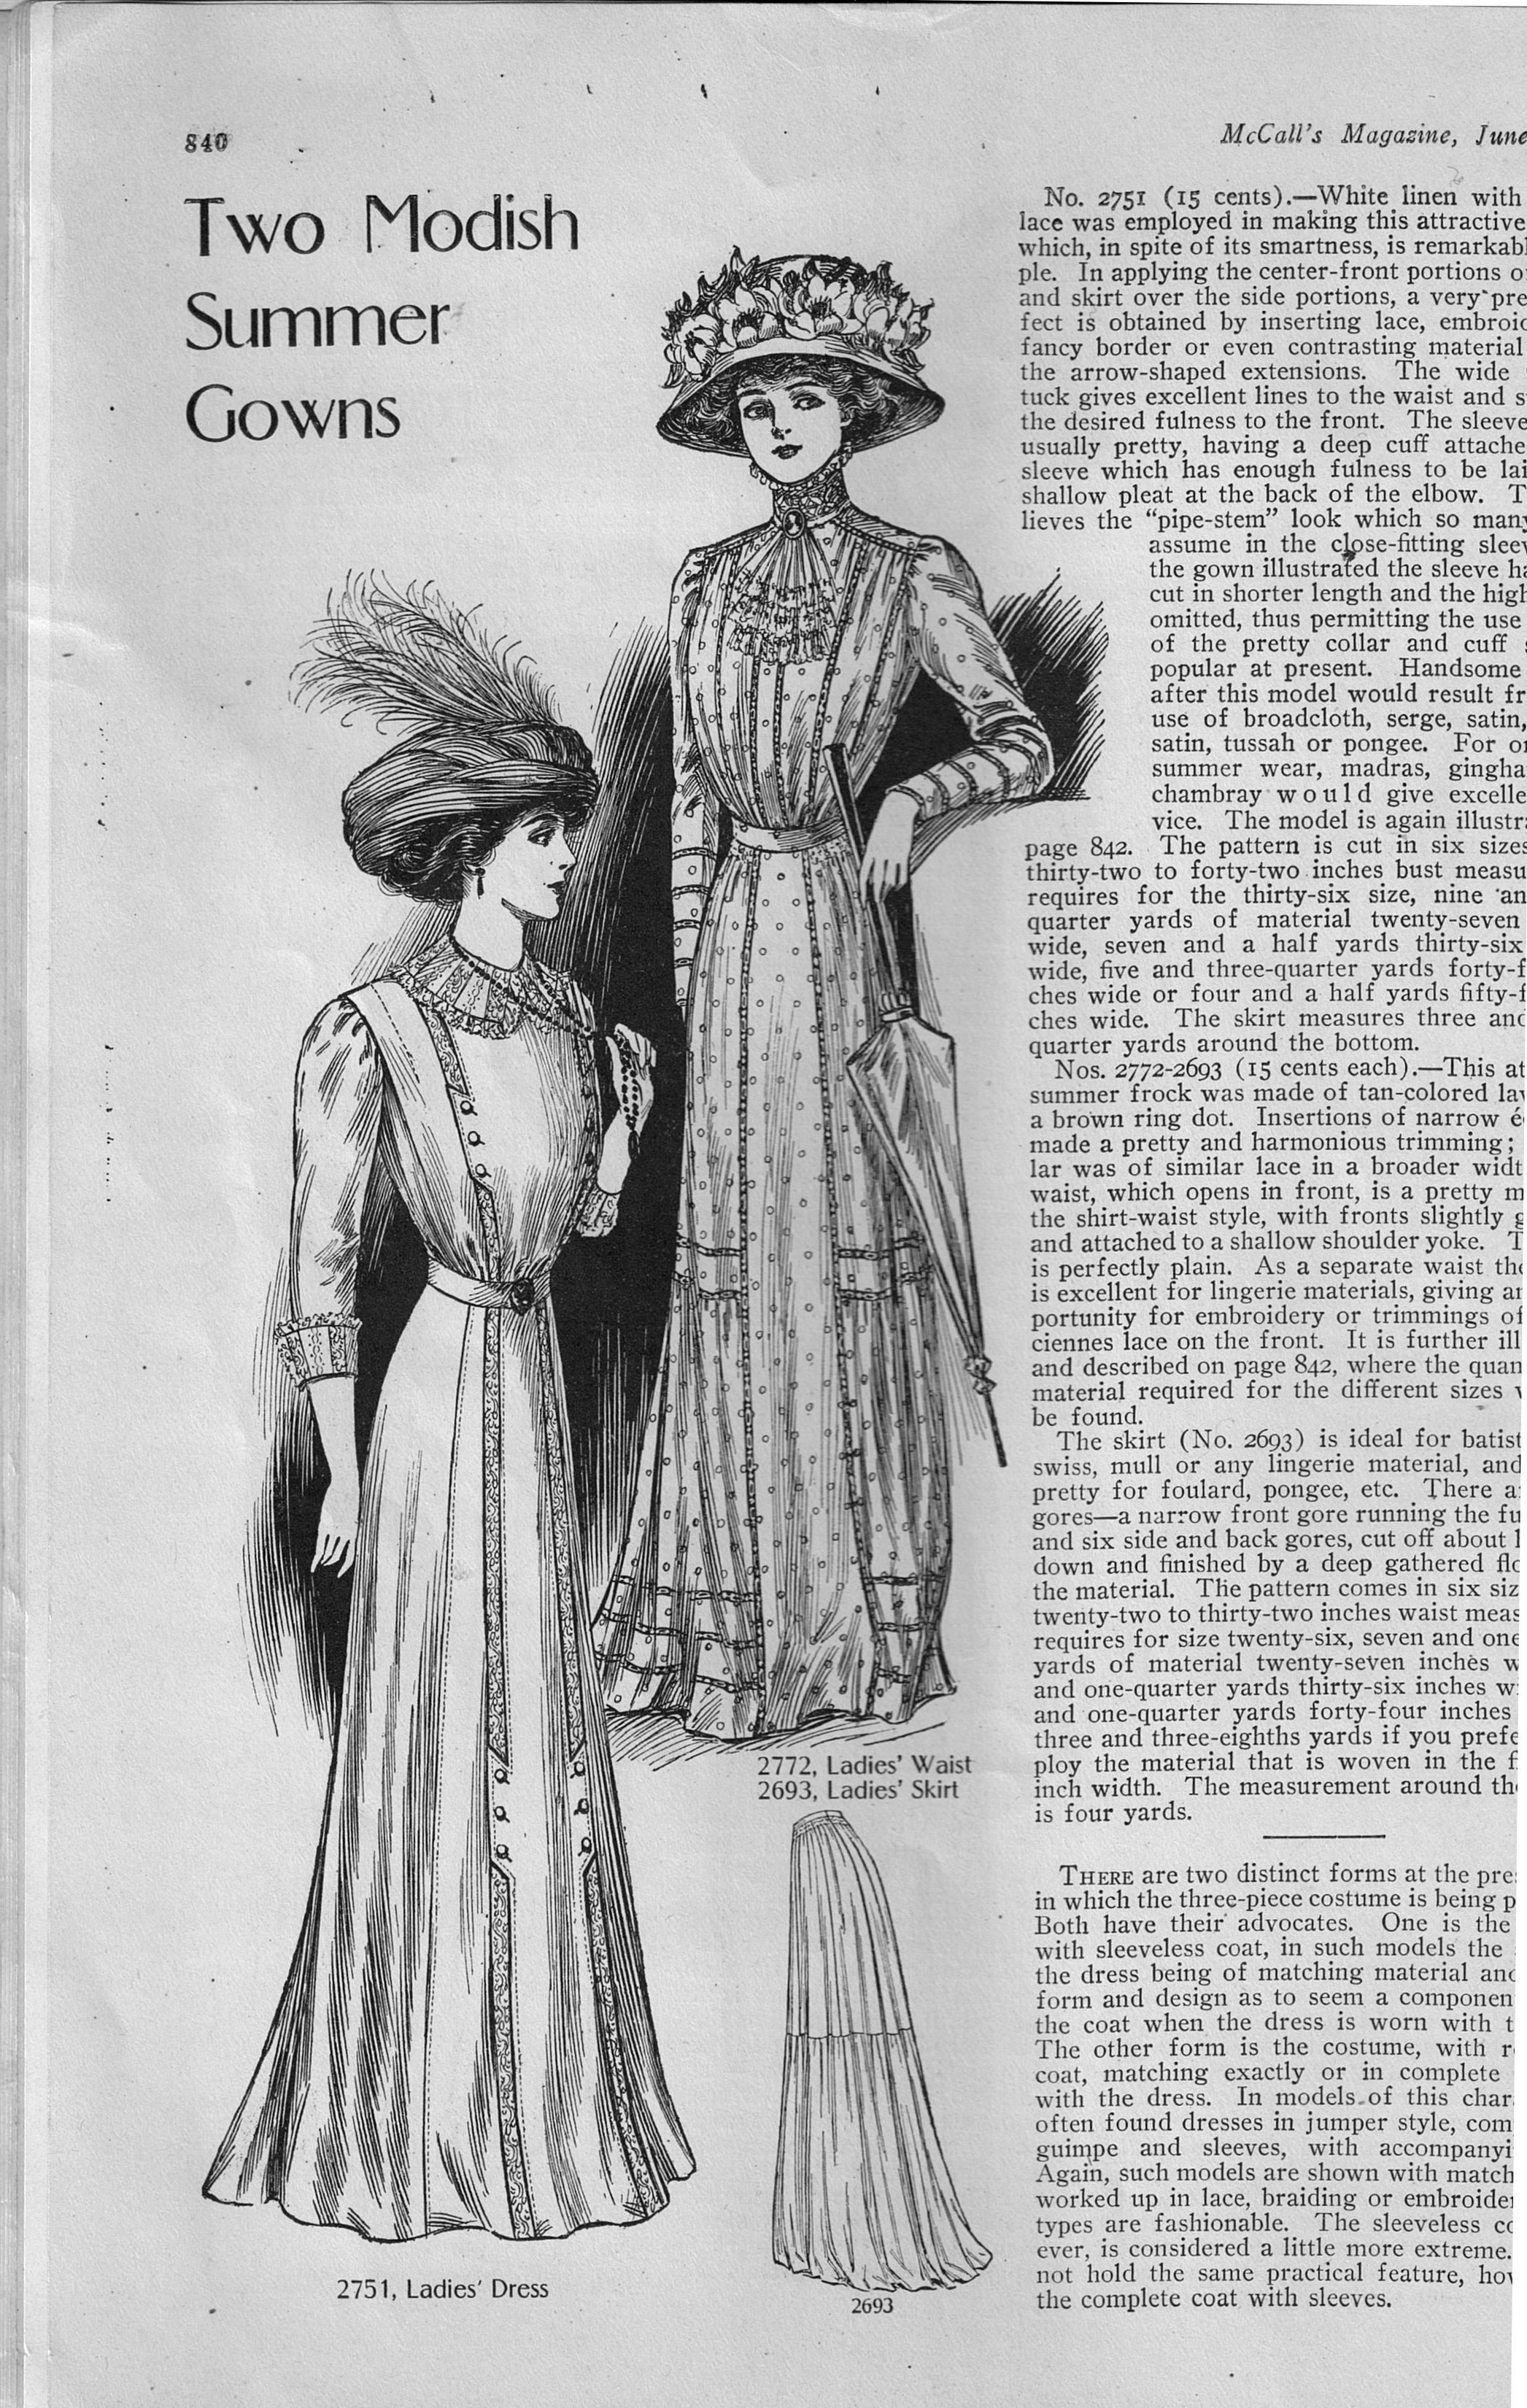 Two Modish Summer Gowns